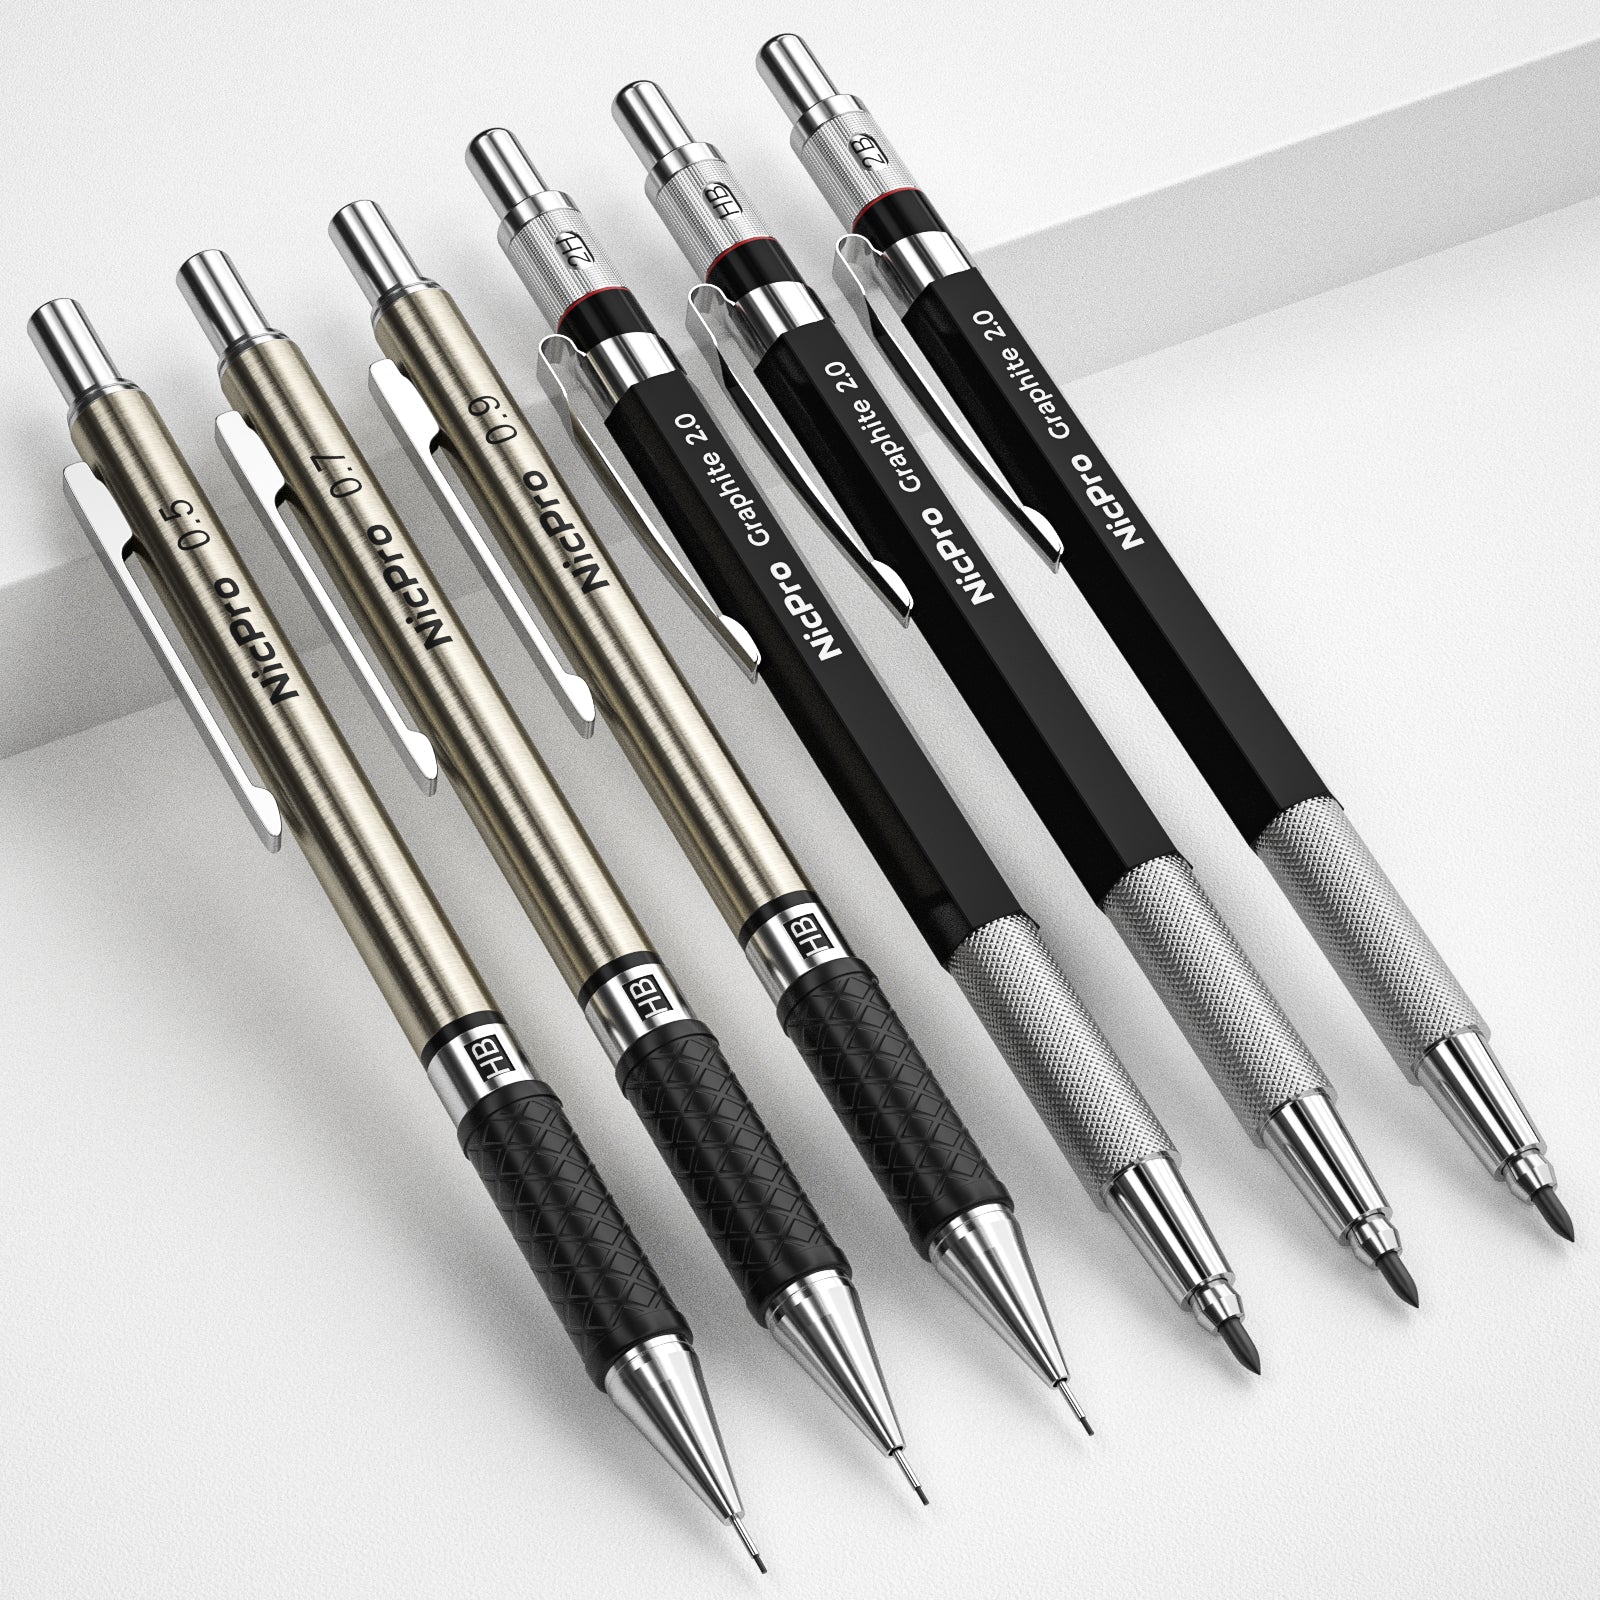 Nicpro 6Pcs Art Mechanical Pencils Set, 3 Pcs Metal Drafting Pencil 0.5mm & 0.7mm & 0.9mm and 3 Pcs 2mm Graphite Lead Holder (2B HB 2H) with 12 Tubes Lead Refills